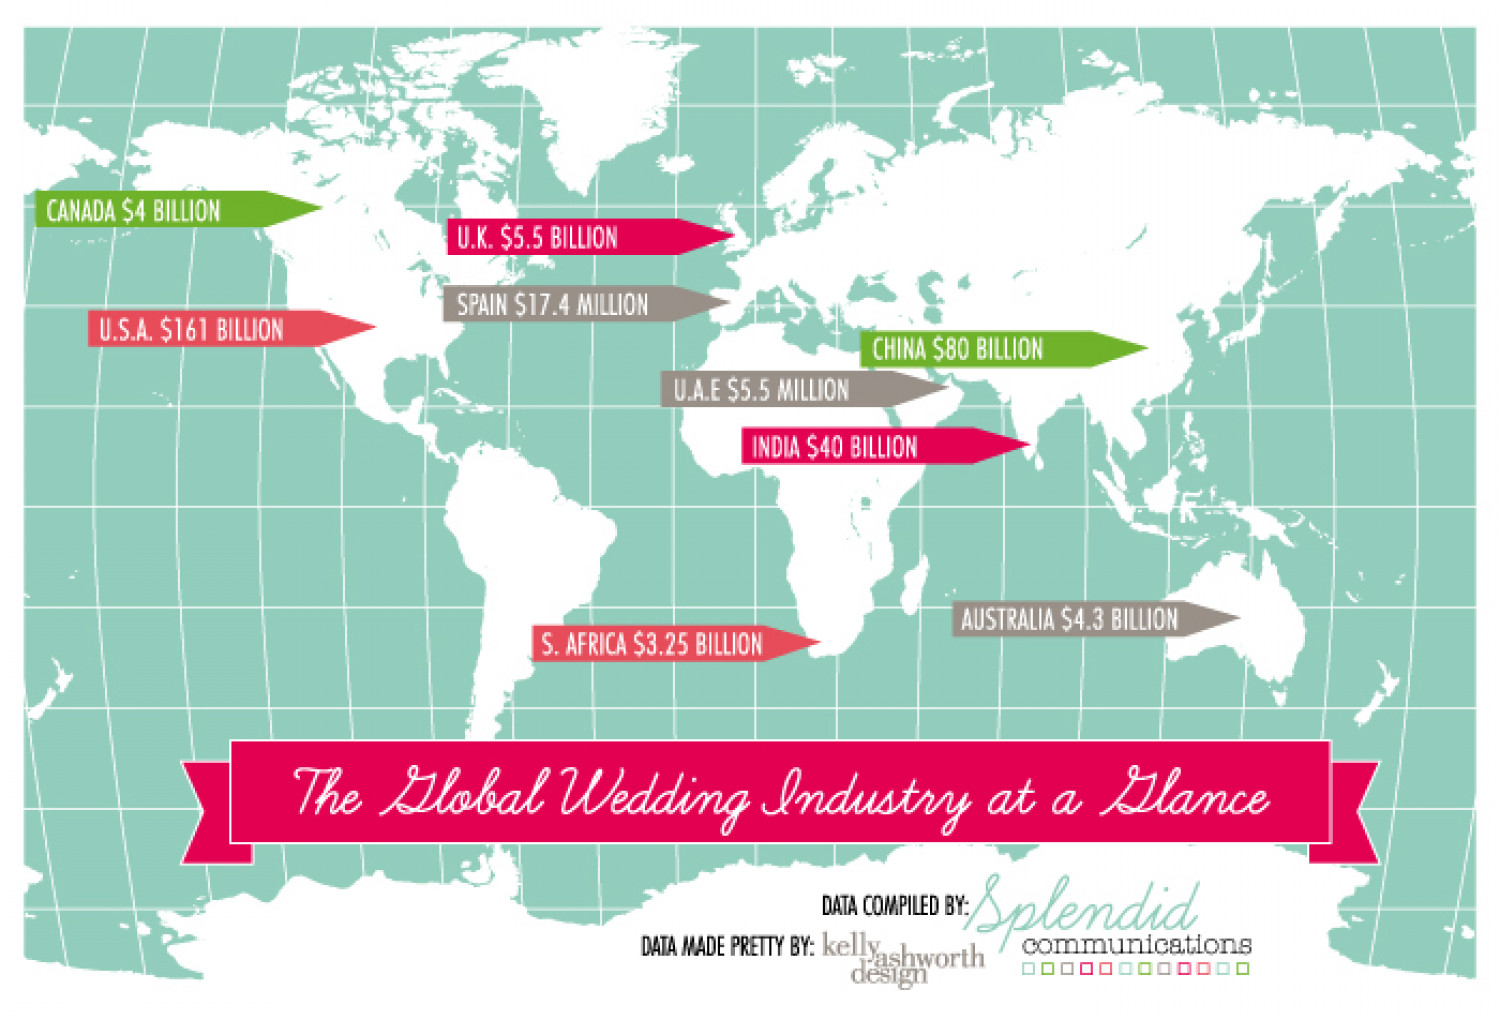 The Global Wedding Industry at a Glance Infographic